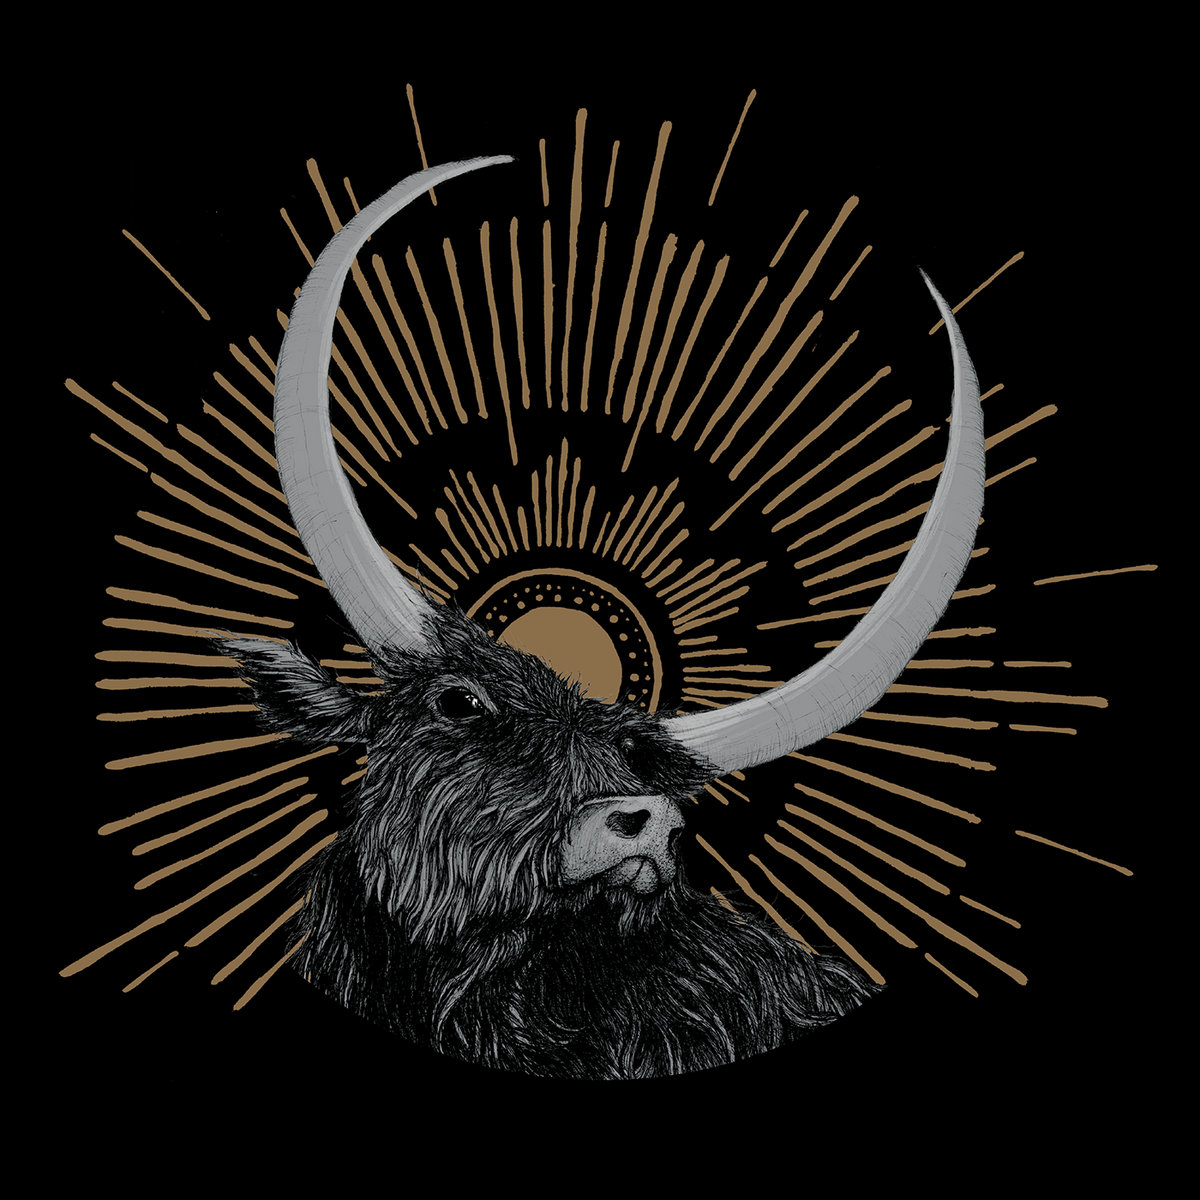 katie kim hour of the ox akbum art - illustration of an ox on a dark background